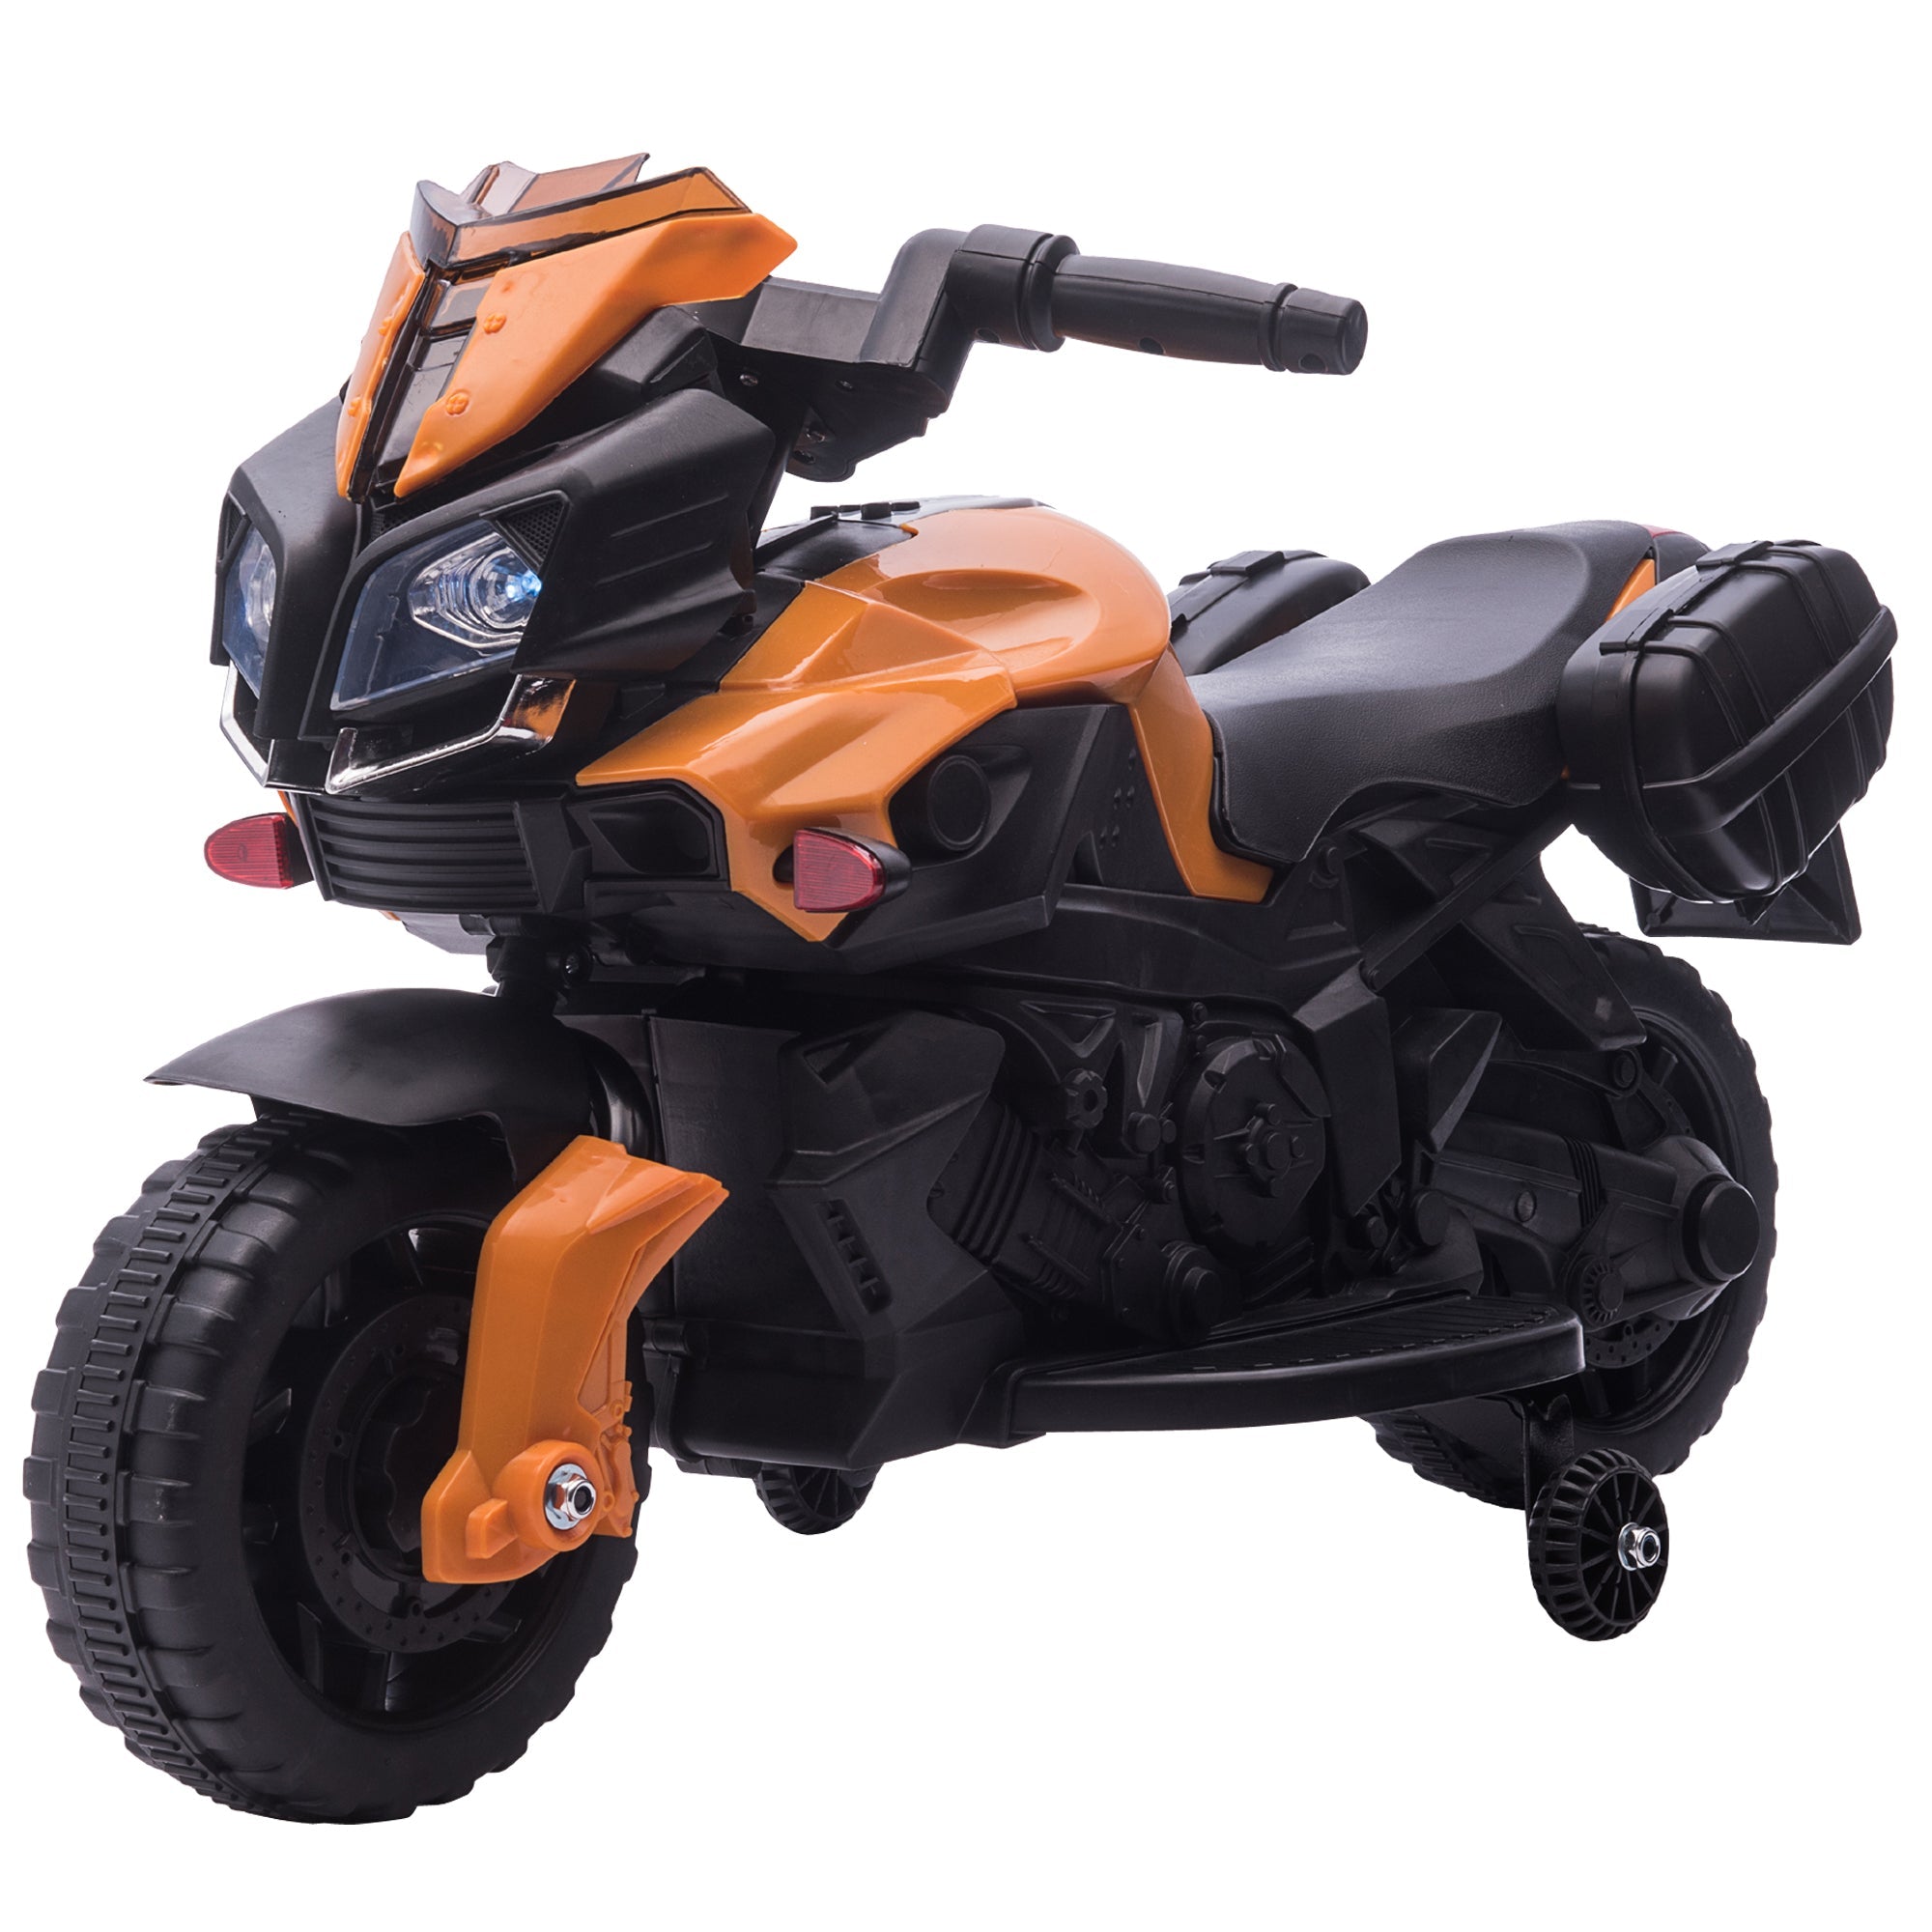 HOMCOM Kids 6V Electric Ride On Motorcycle with Lights, Horn & Realistic Sounds (1.5 - 4 Years Old) (Orange)